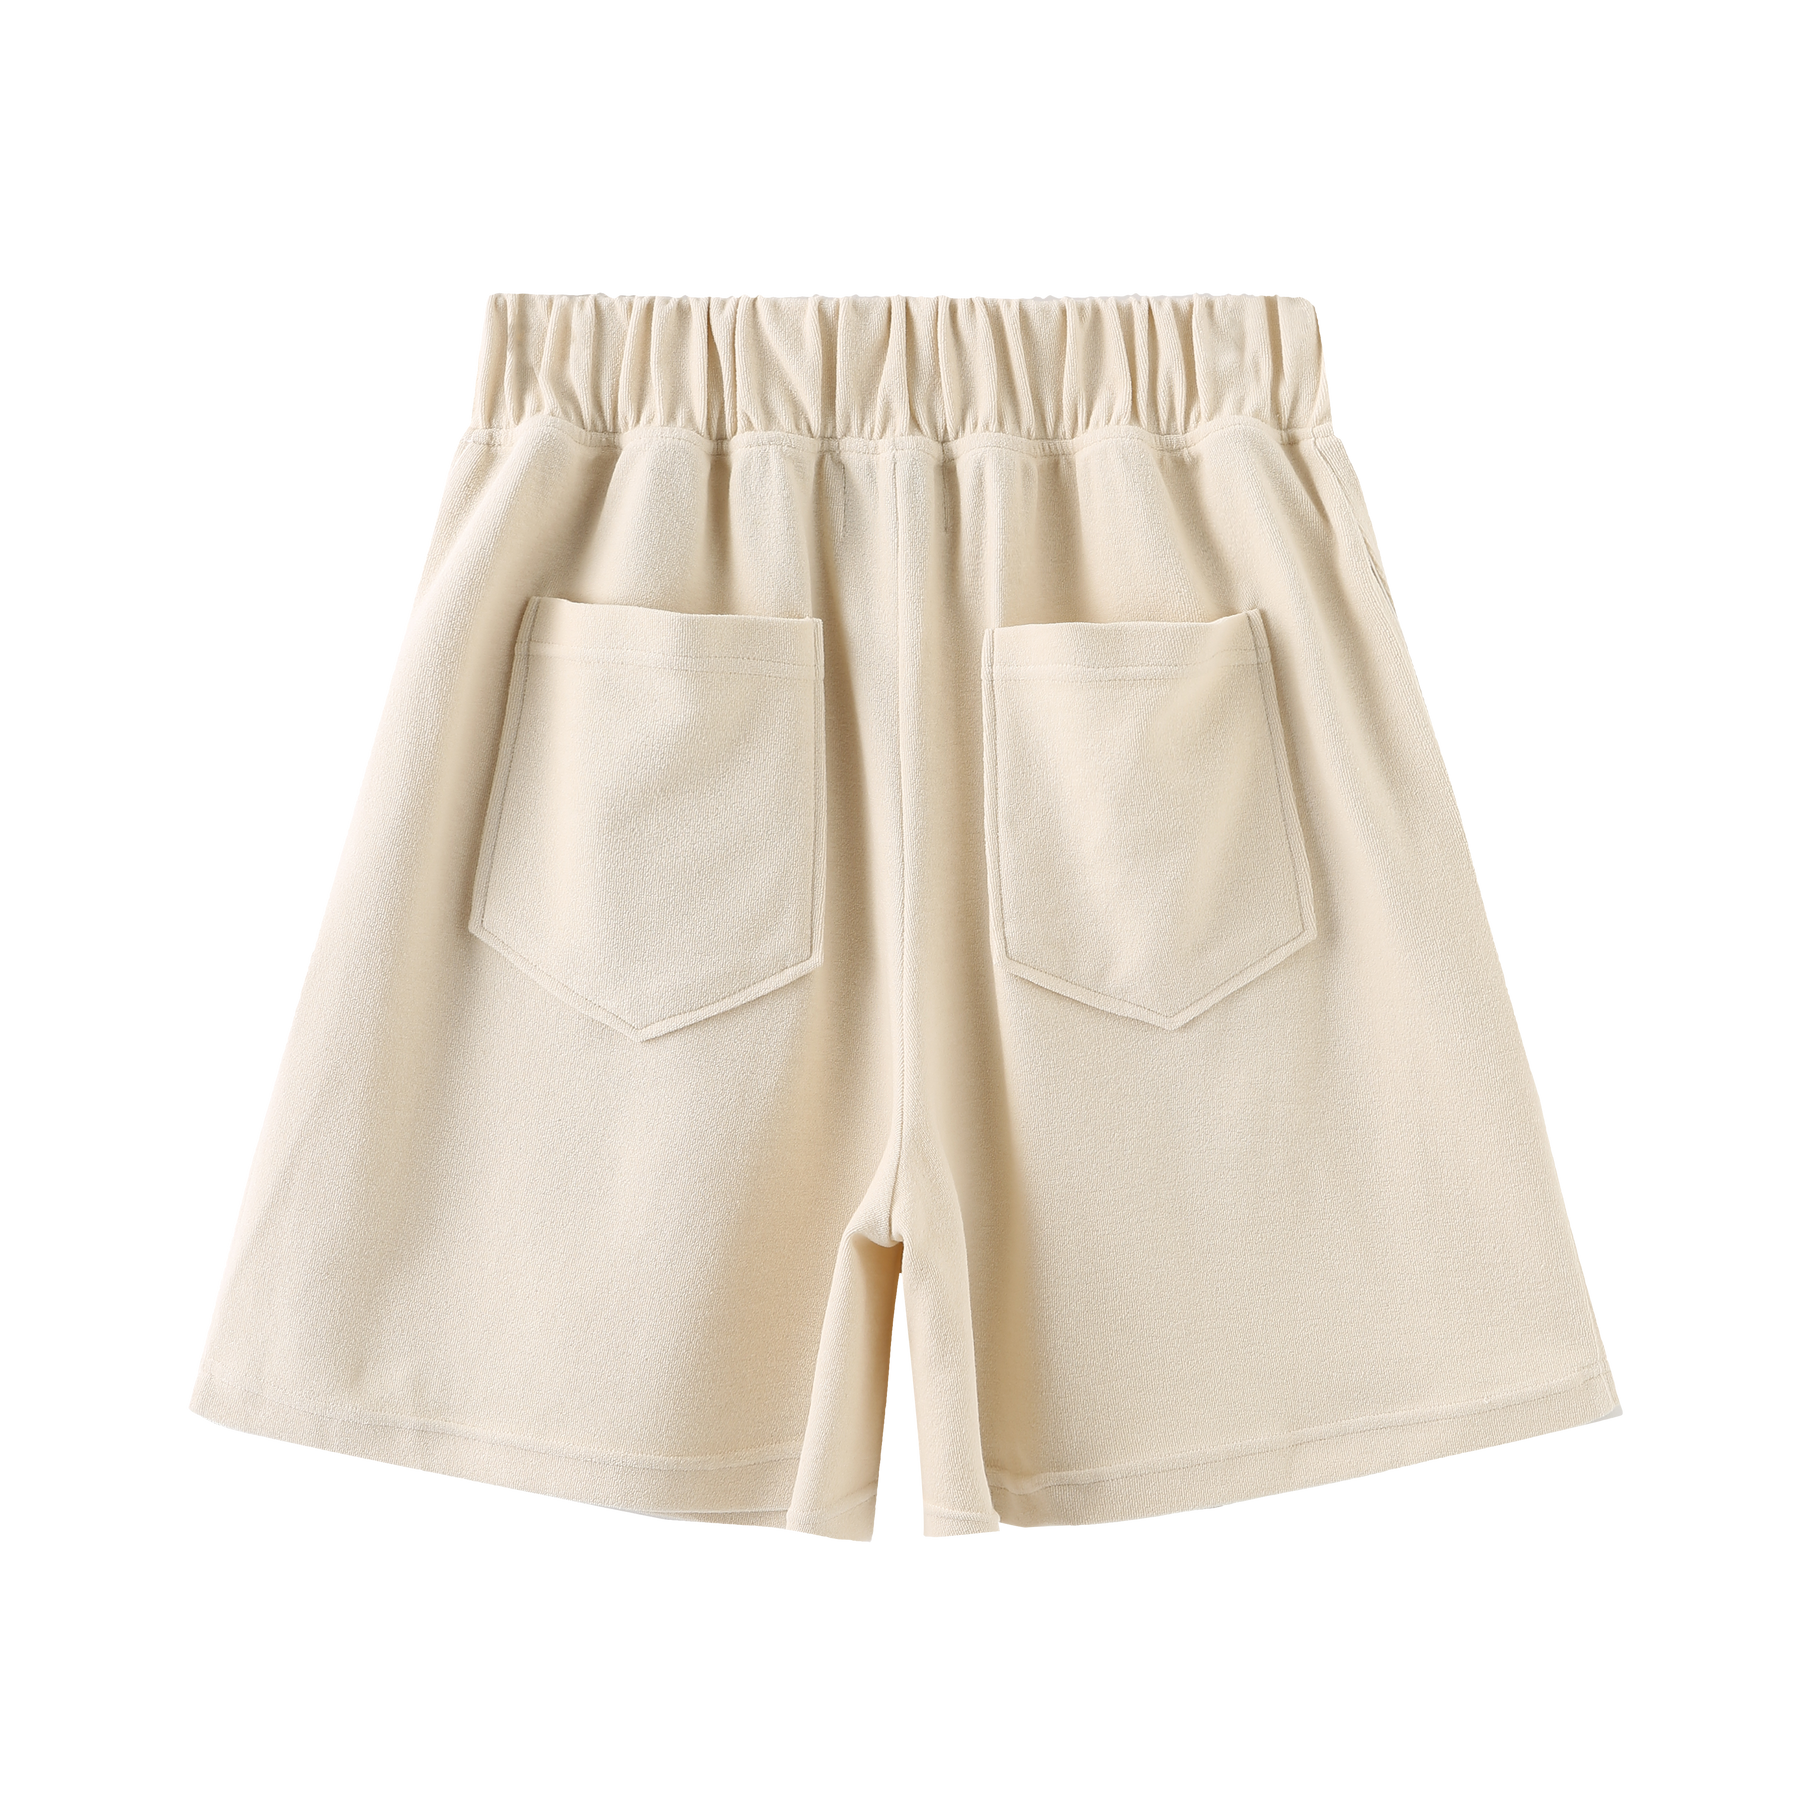 ICON Summer Teddy French Terry Shorts - Ivory